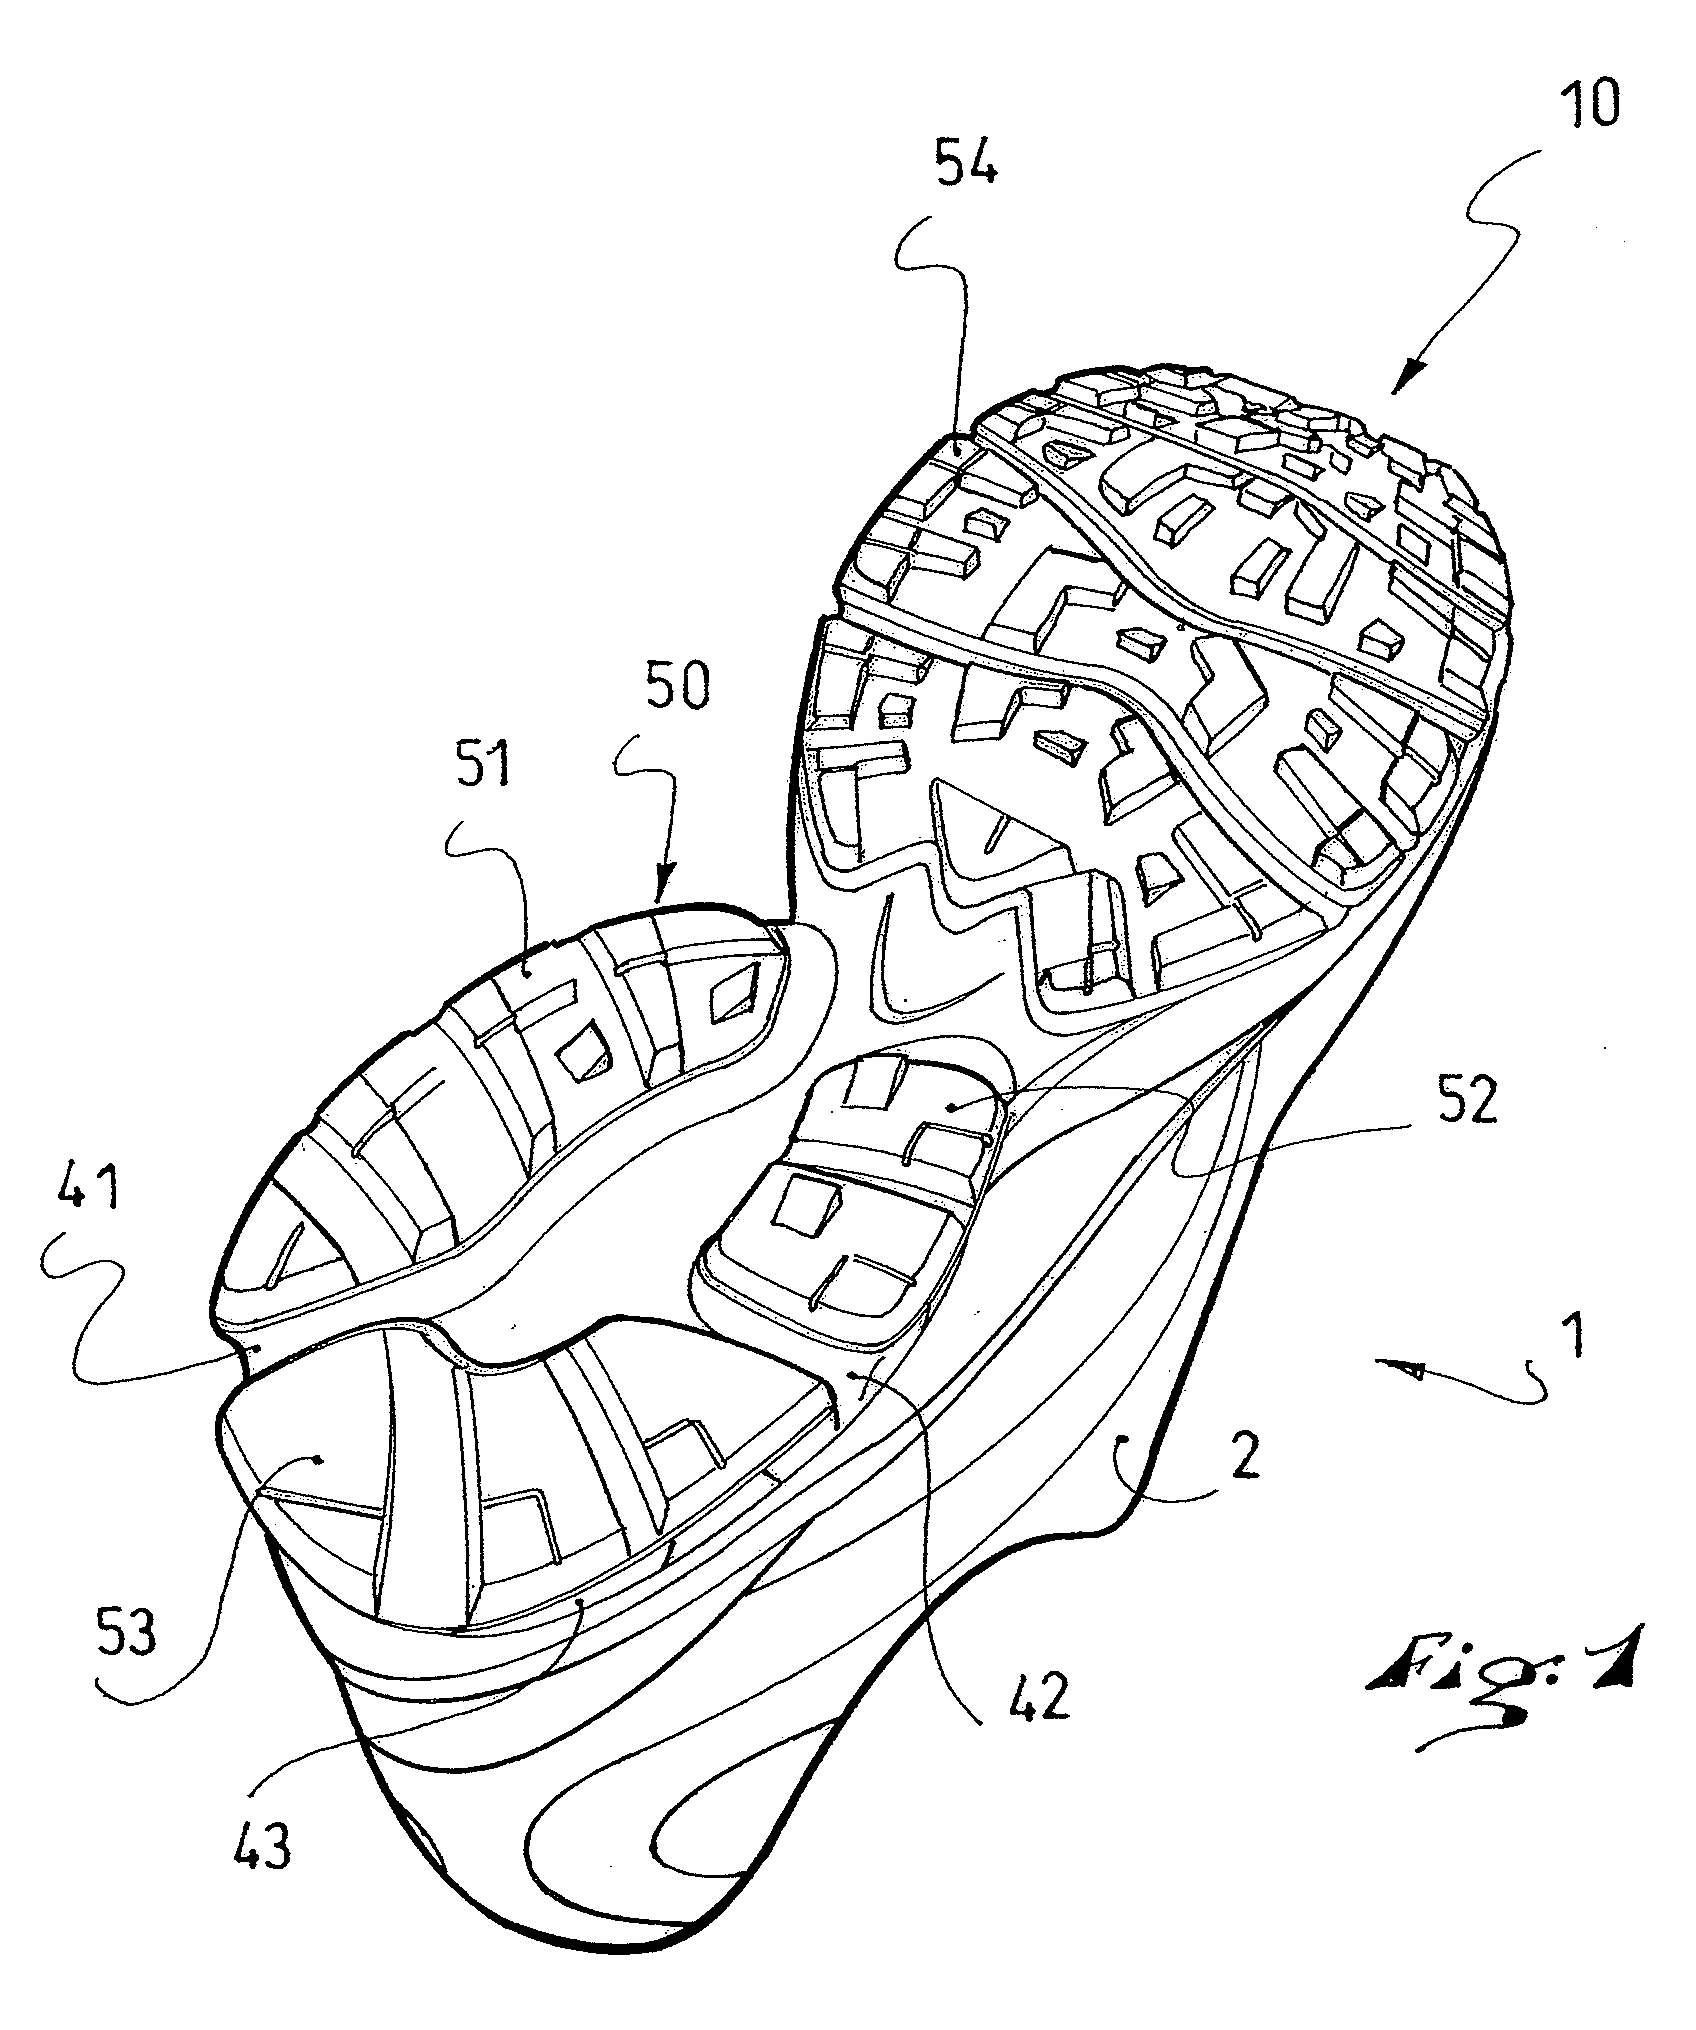 Shock-absorbing system for an article of footwear